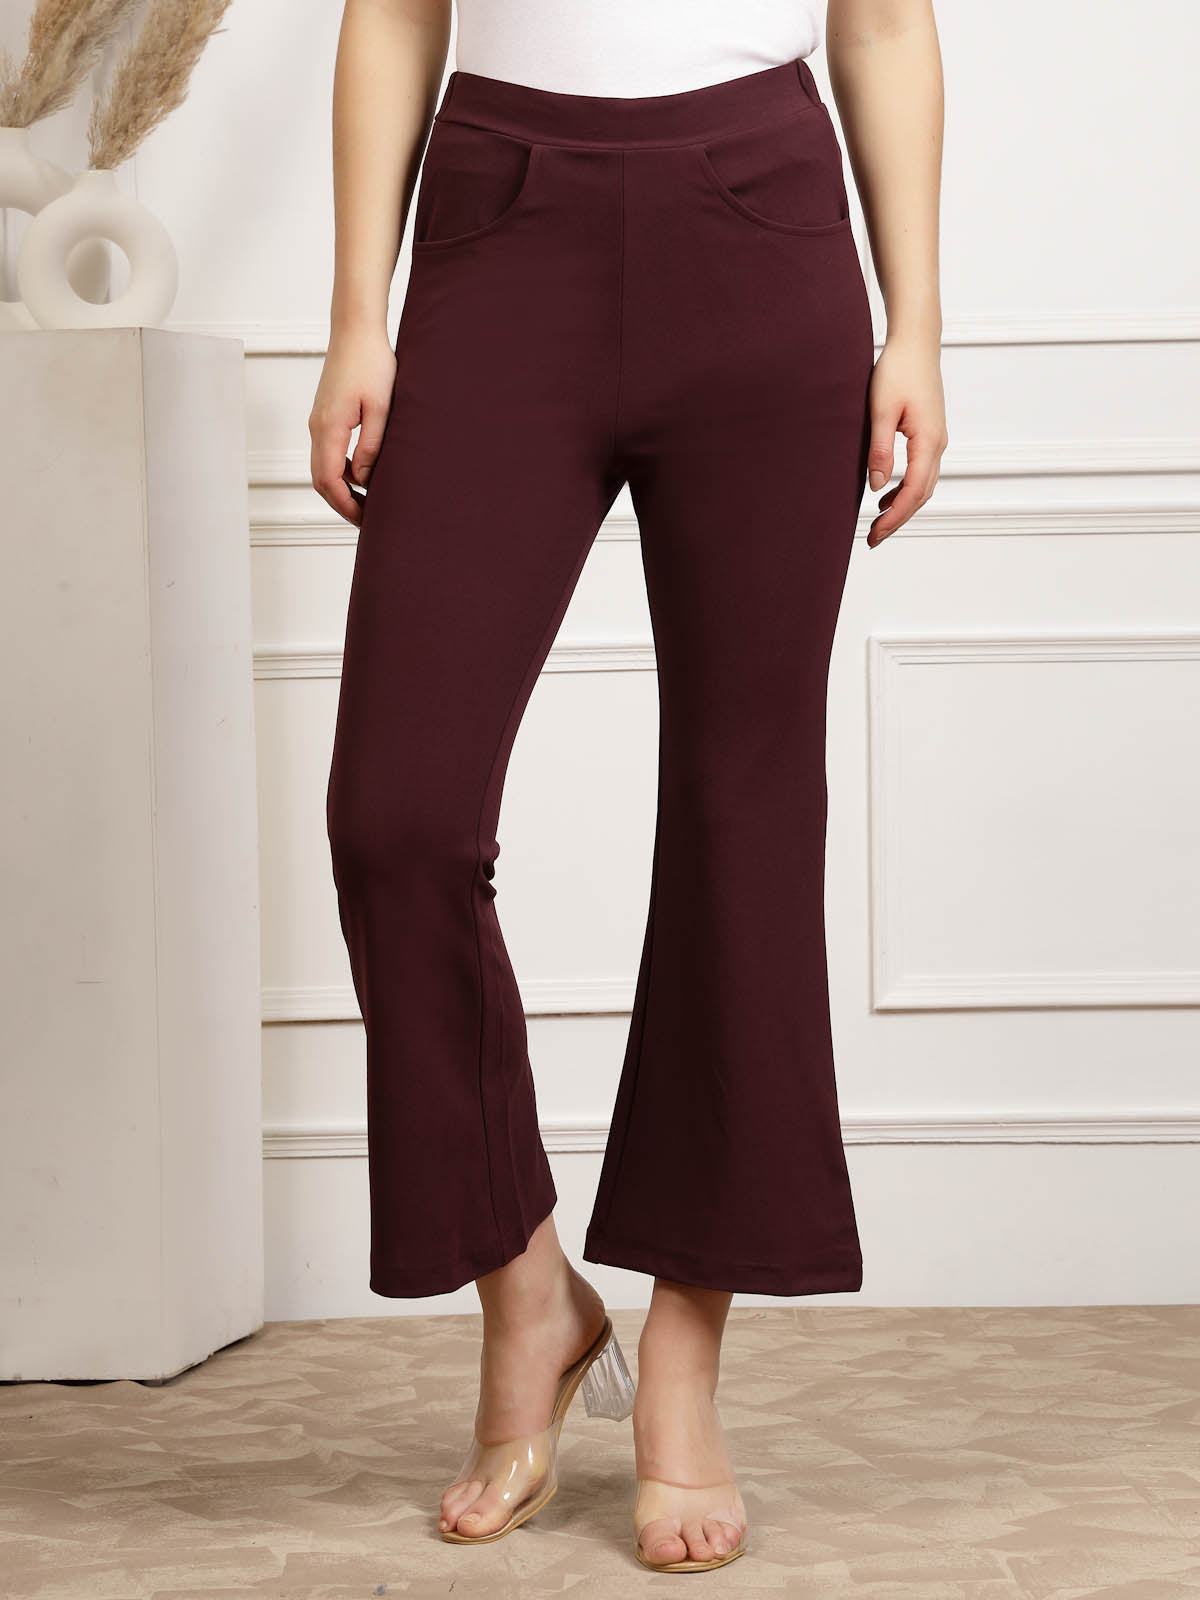 Trousers In cady Bordeaux GBDP18876-V2